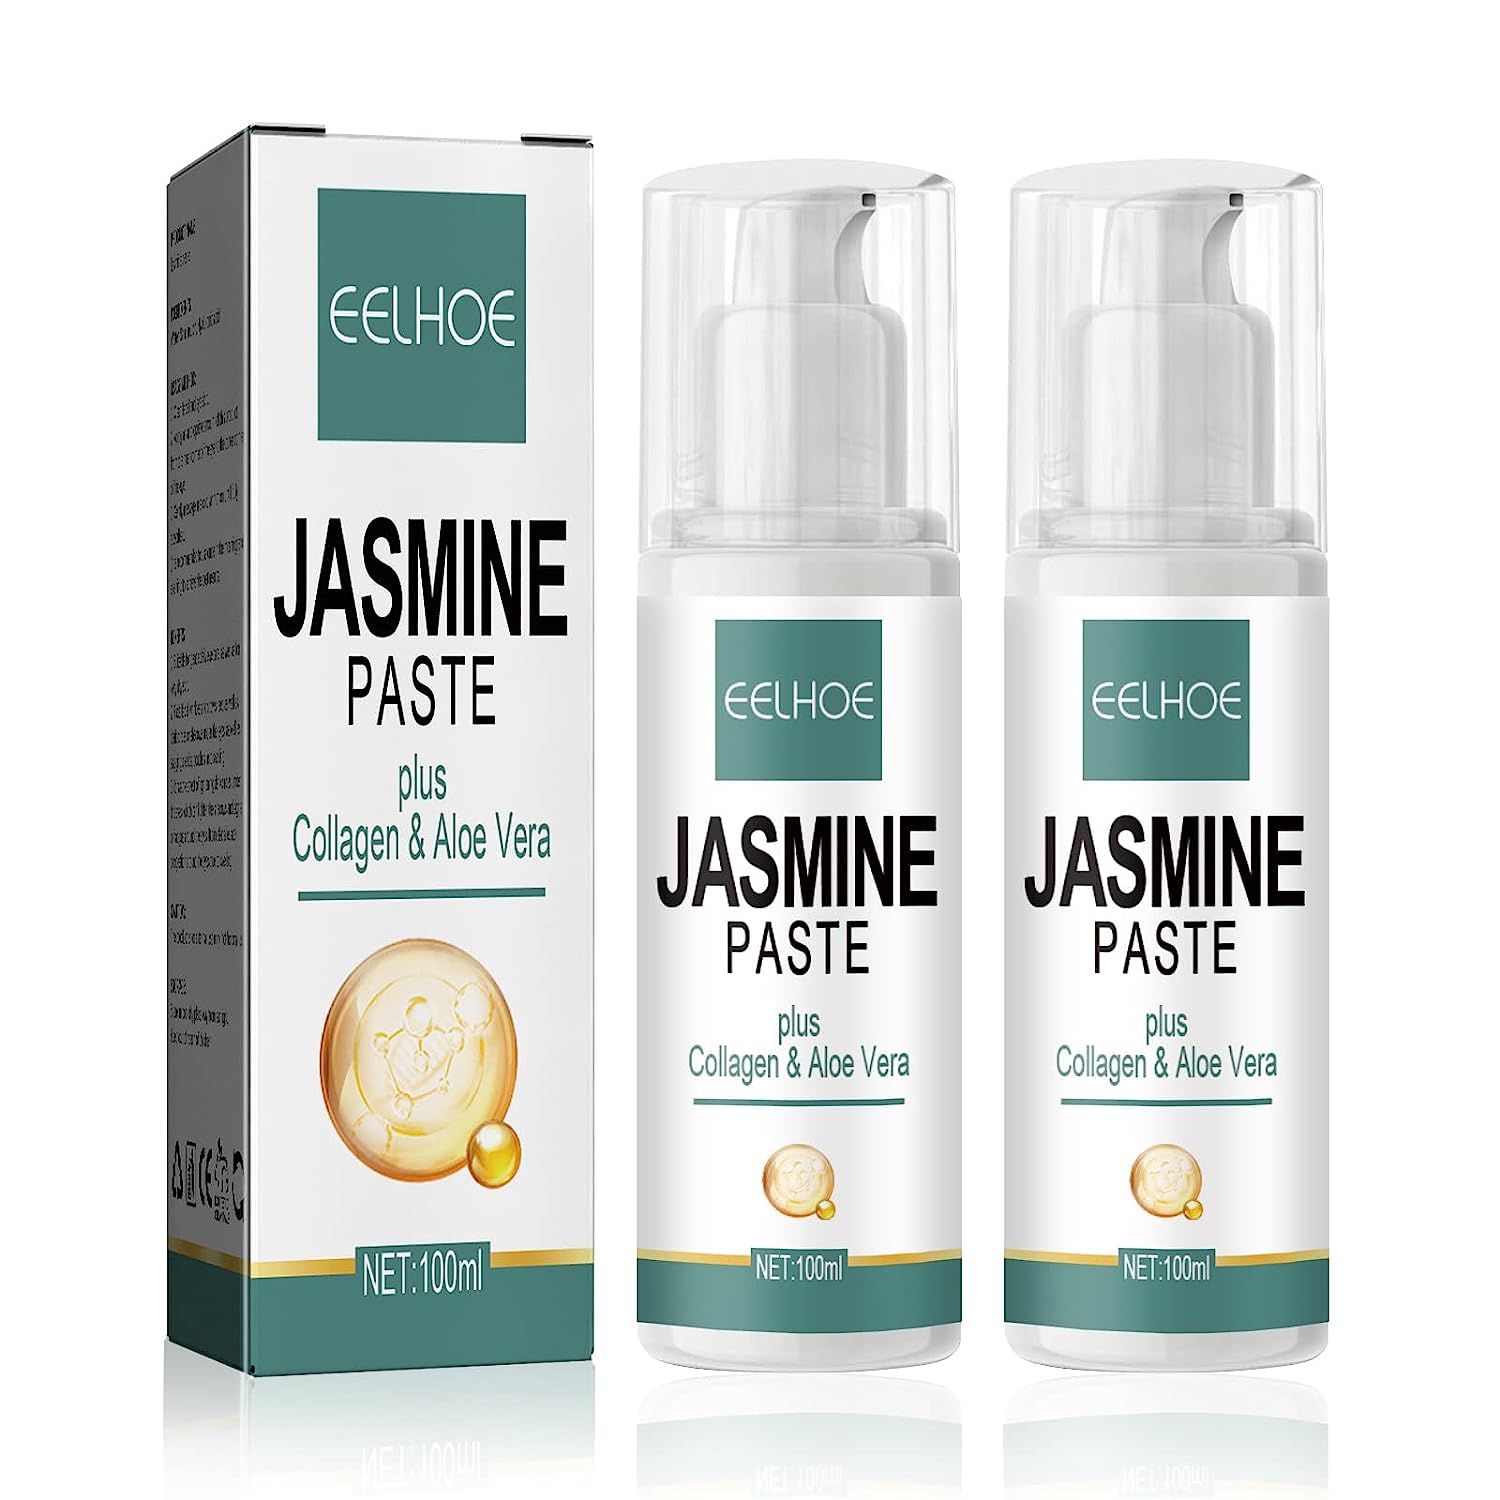 Jasmine Ointment Dark Circles, Jasmine Ointment Plus, Moss Ointment for Day and Night, Jasmine Ointment Dark Circles, Active Jasmine Ointment Dark Circles, Slip Lids, Tear Bags, Crow \ 'S FEET Pack of 2